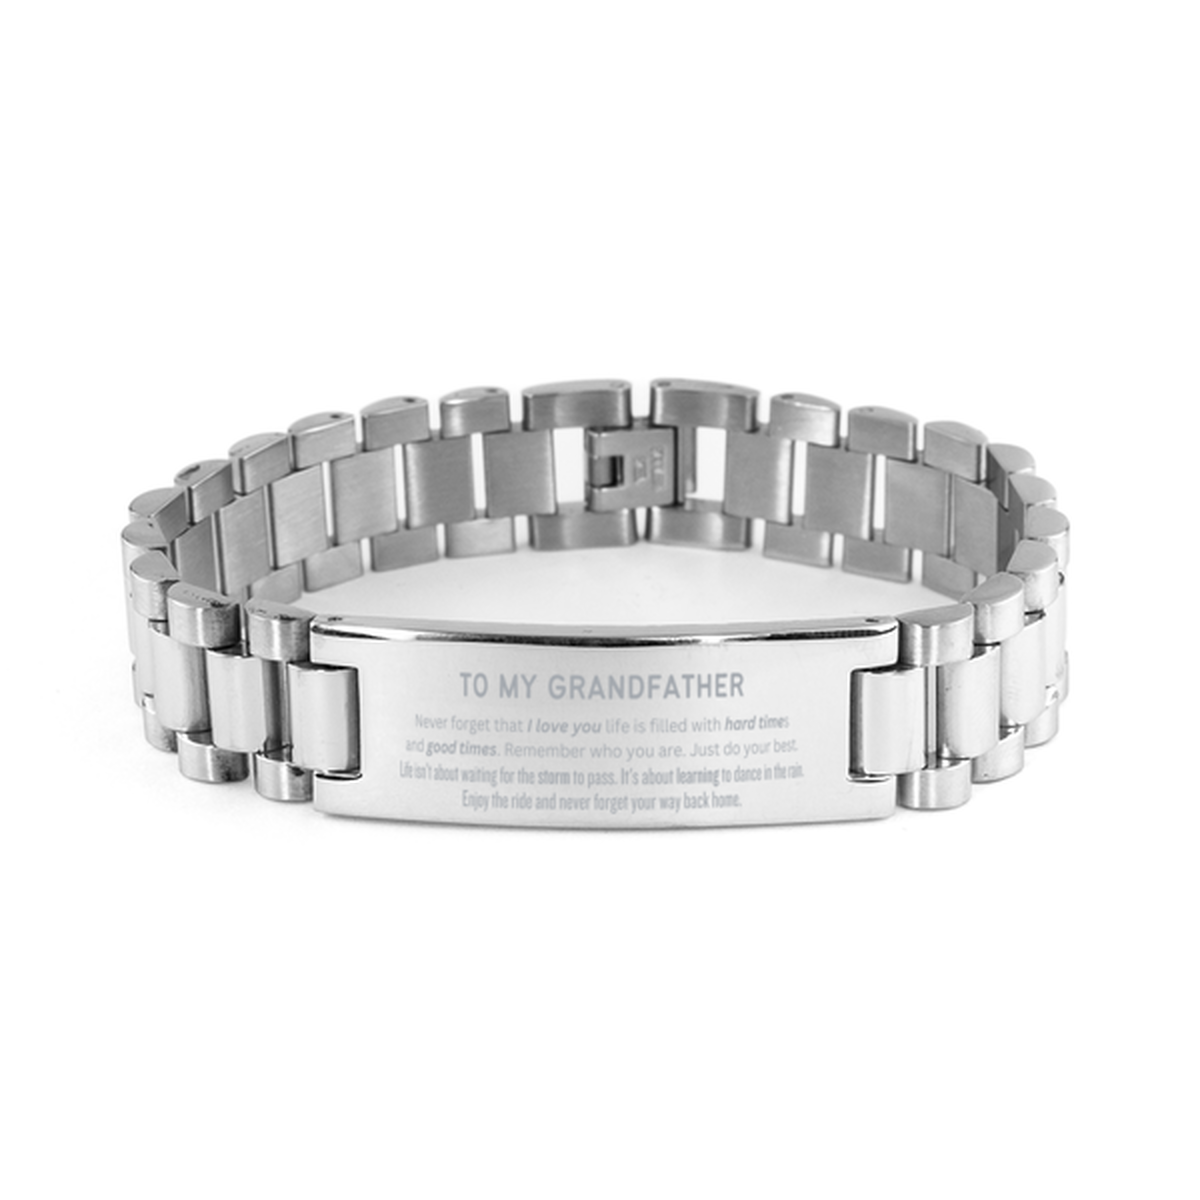 Christmas Grandfather Ladder Stainless Steel Bracelet Gifts, To My Grandfather Birthday Thank You Gifts For Grandfather, Graduation Unique Gifts For Grandfather To My Grandfather Never forget that I love you life is filled with hard times and good times.